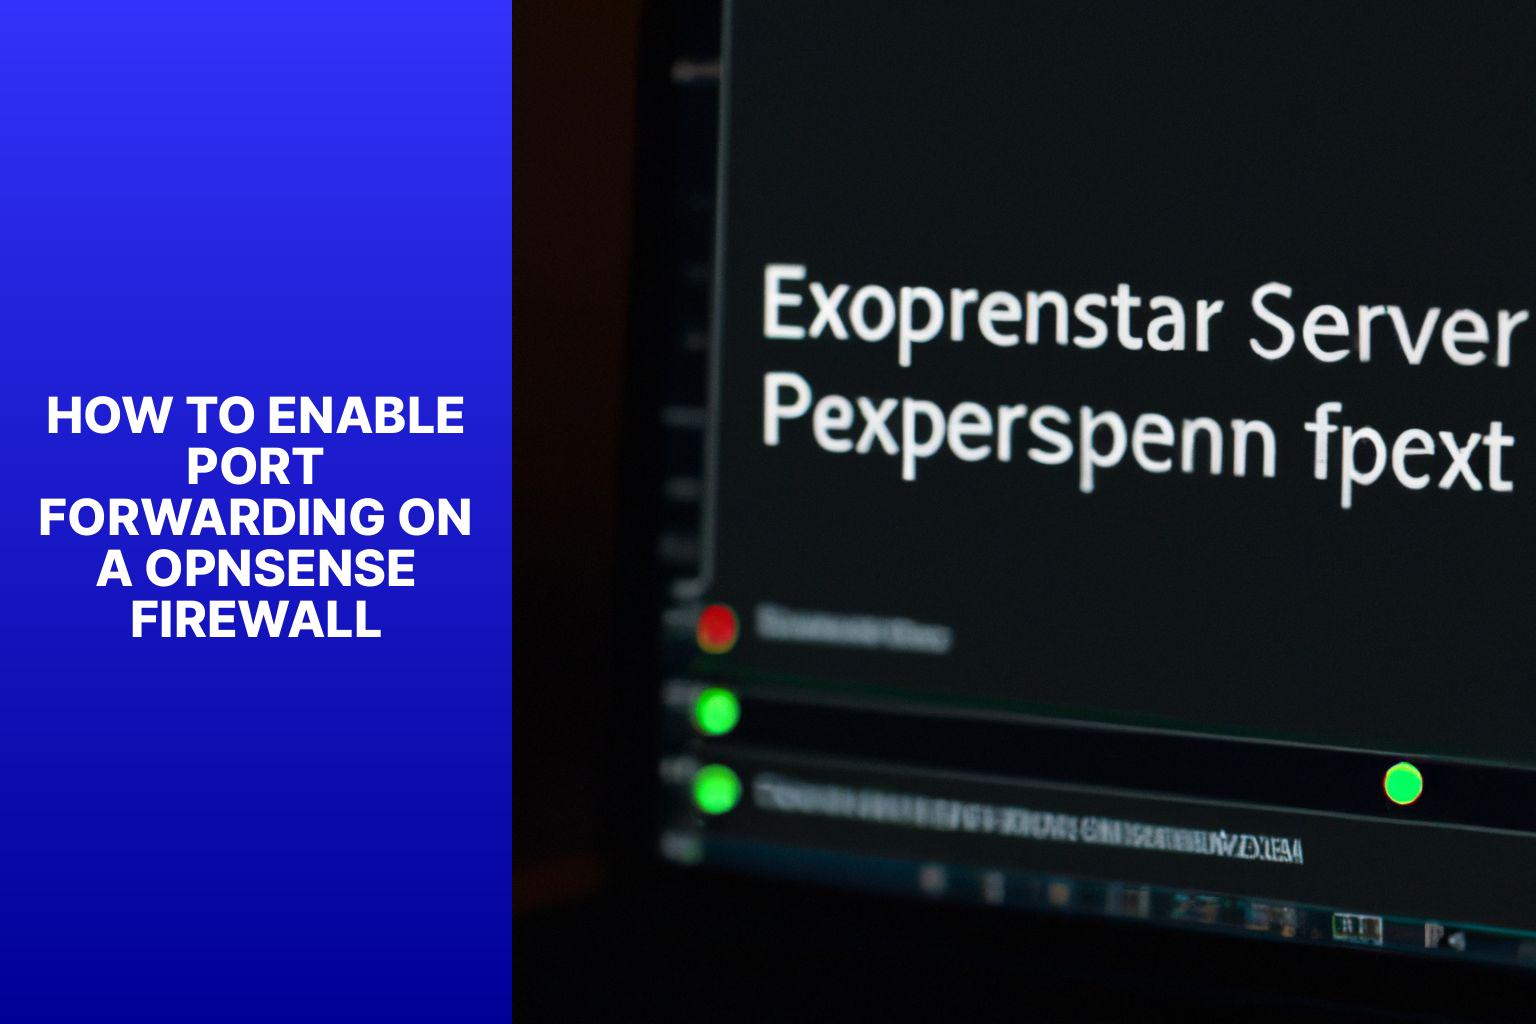 Step-by-Step Guide: Enabling Port Forwarding on OPNSense Firewall